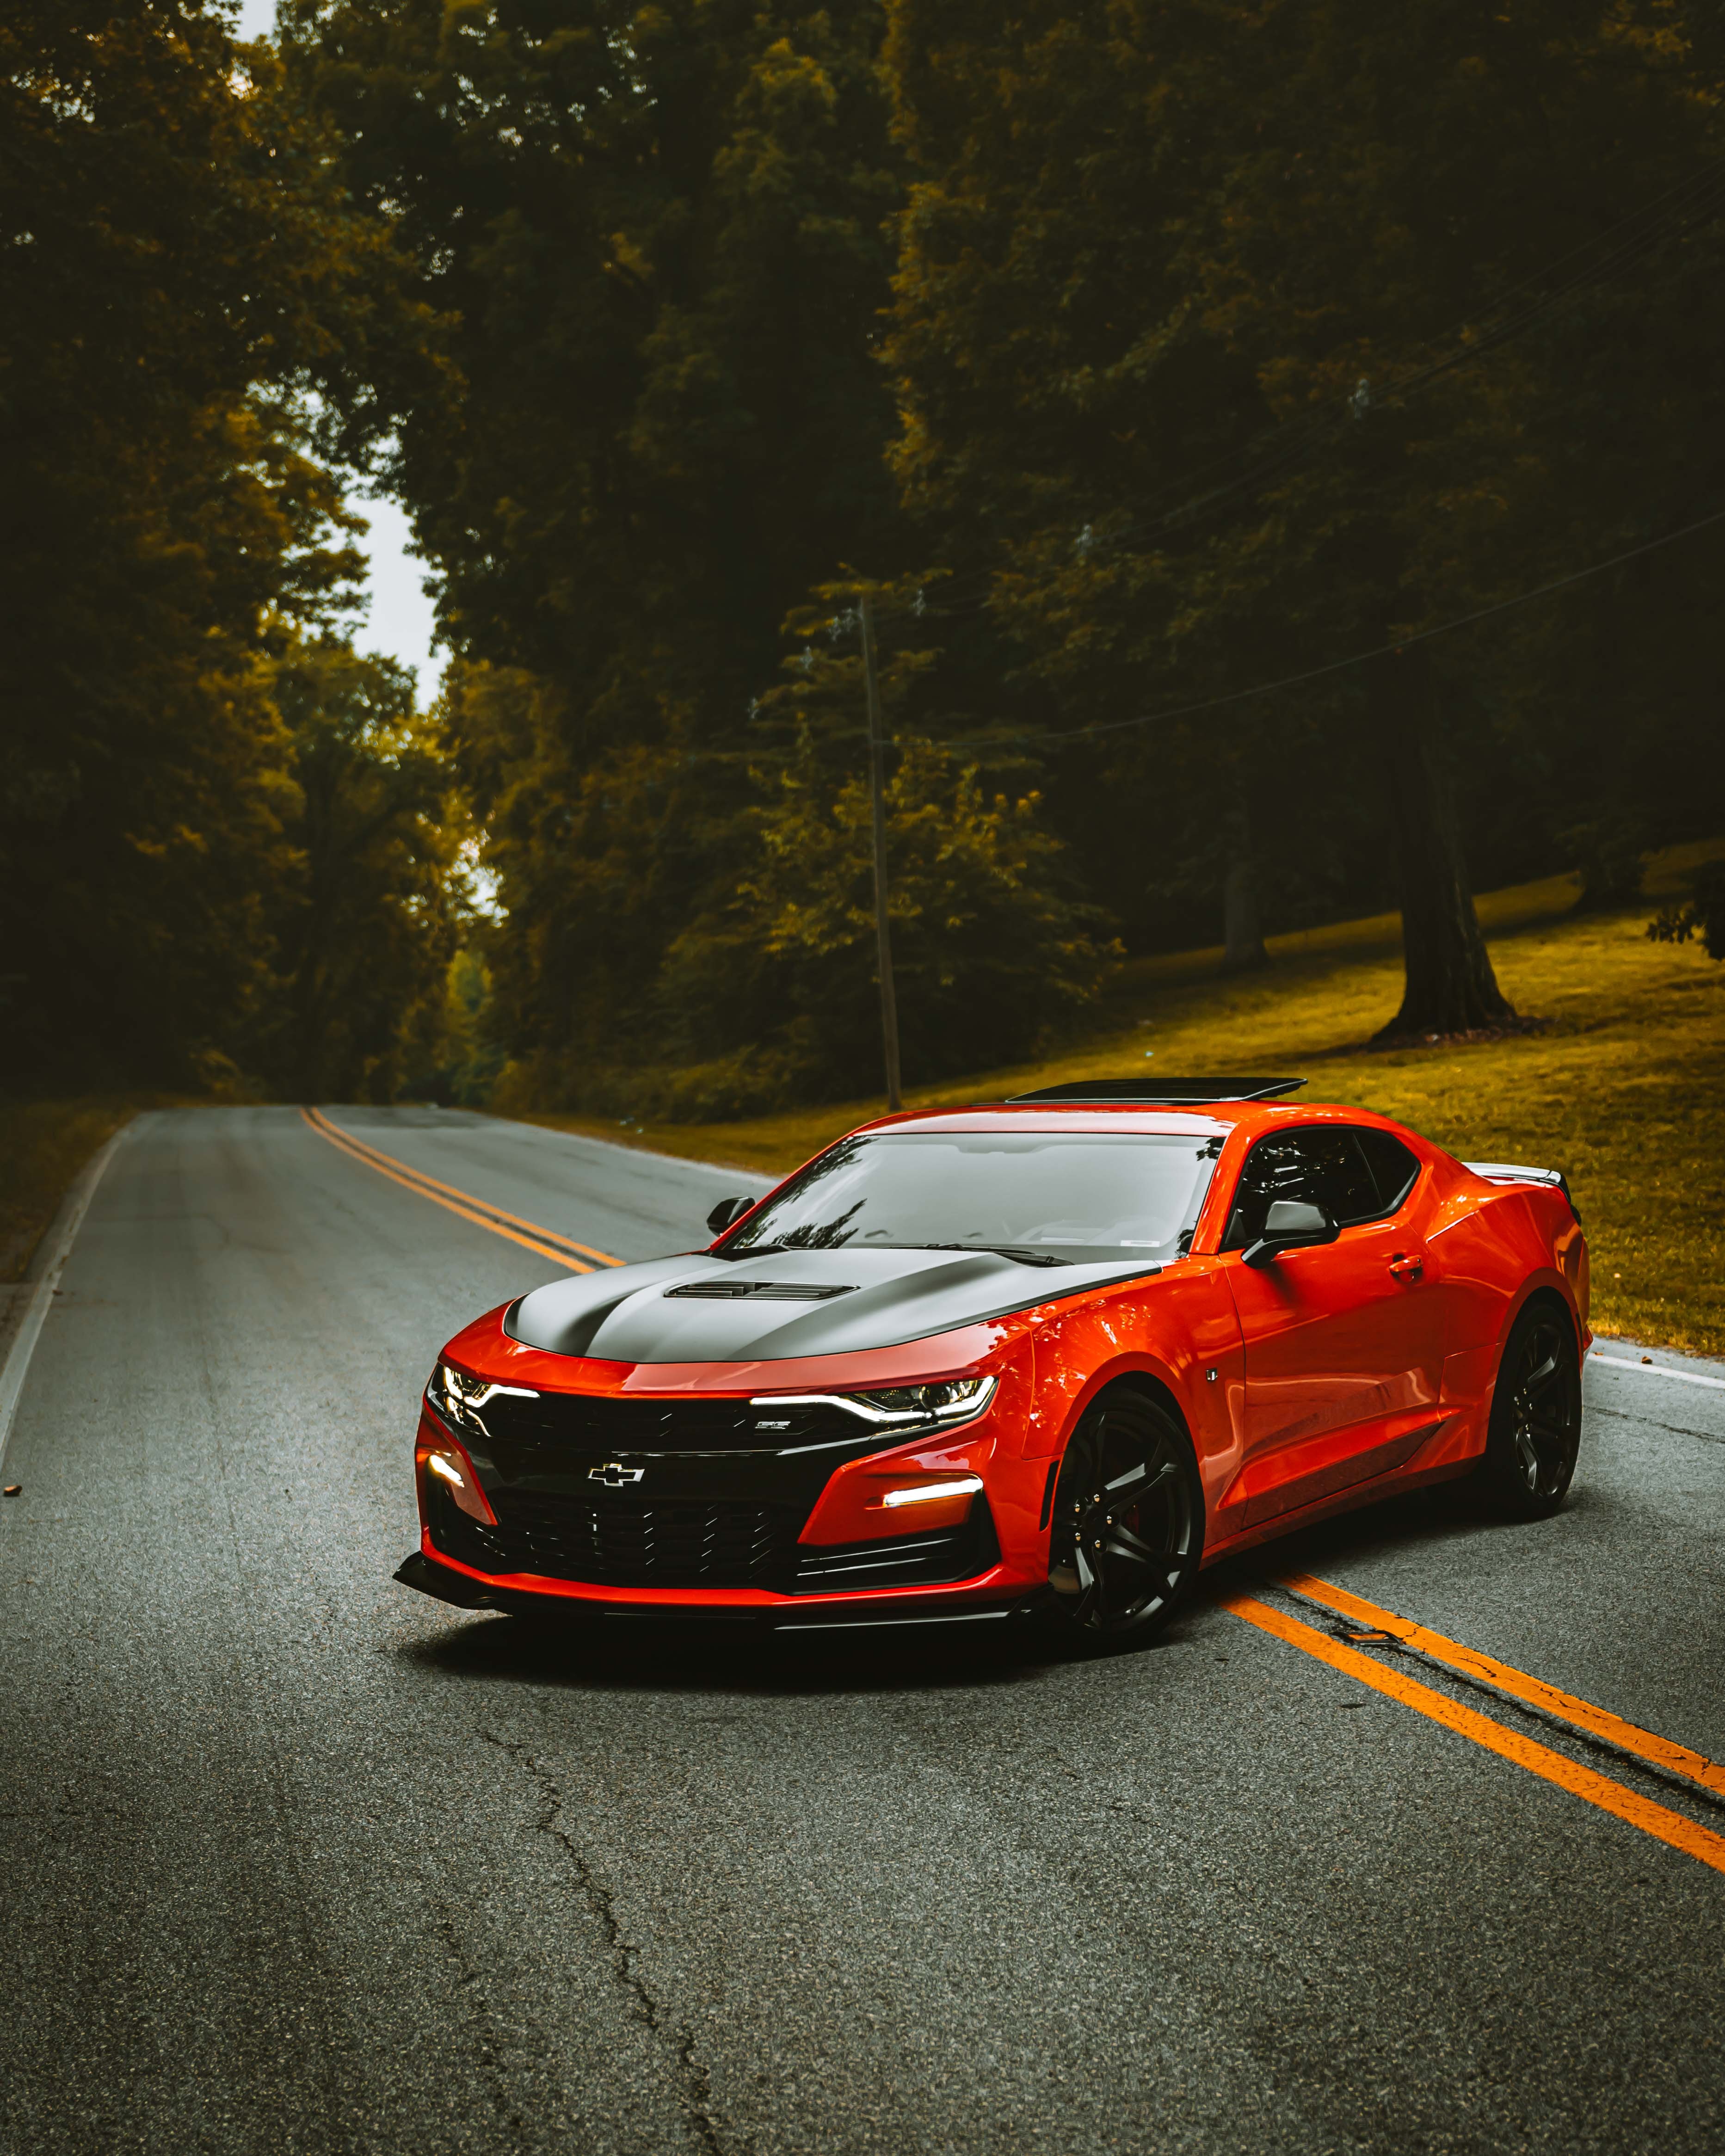 chevrolet, car, machine, chevrolet camaro, cars, sports car, sports, red, road High Definition image